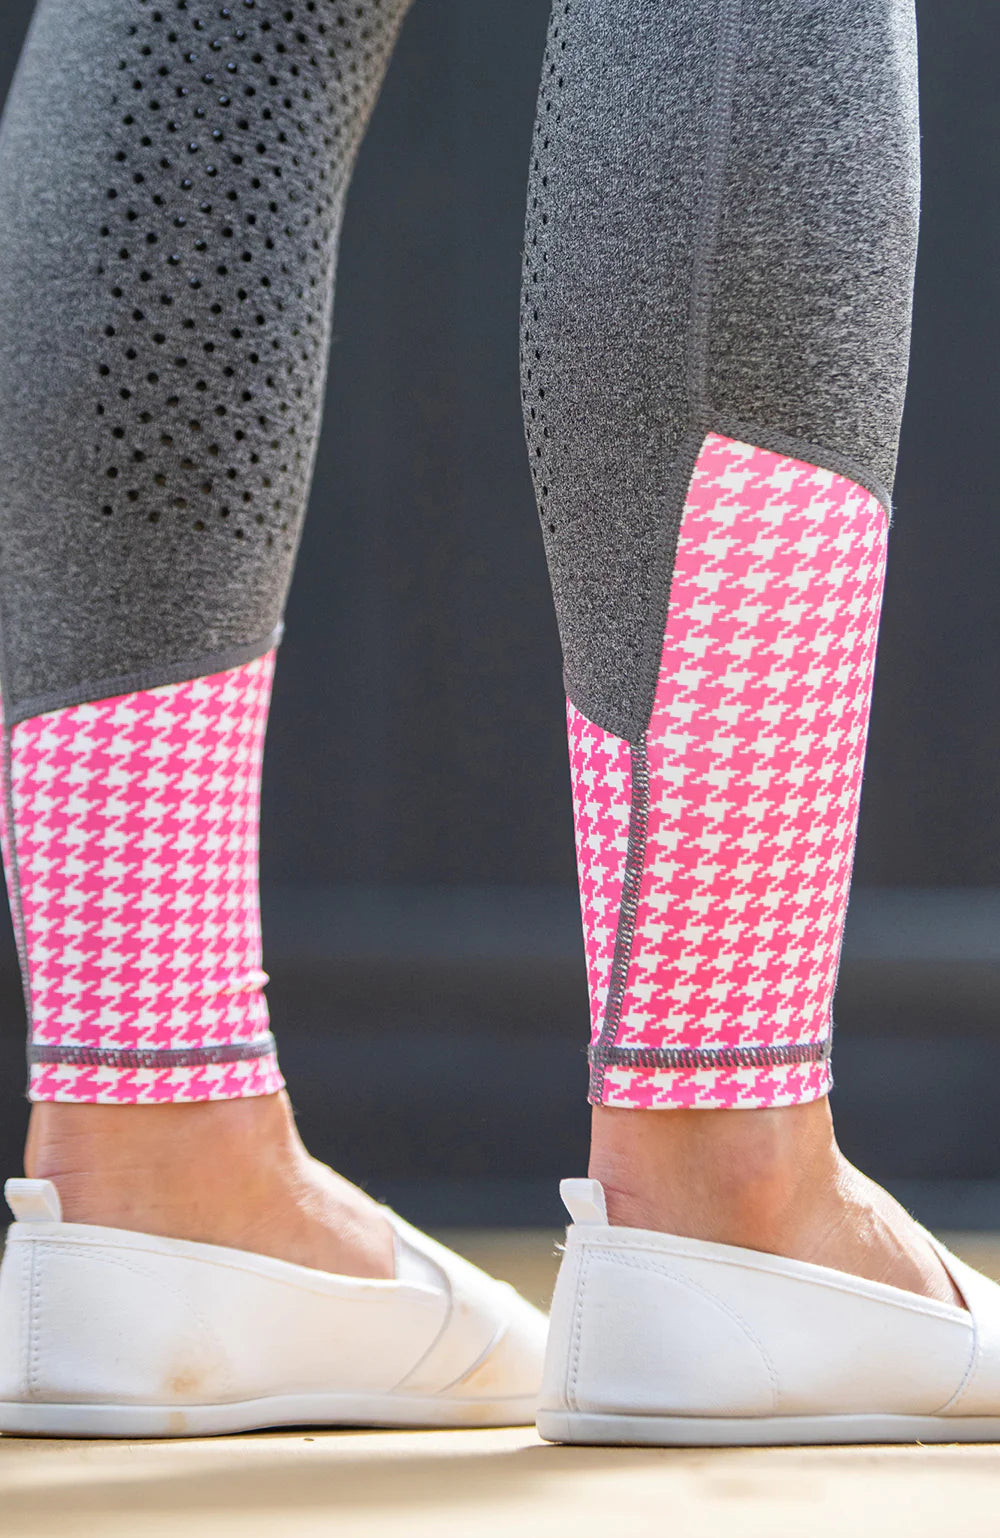 BARE Performance Riding Tights - Grey with Pink Houndstooth